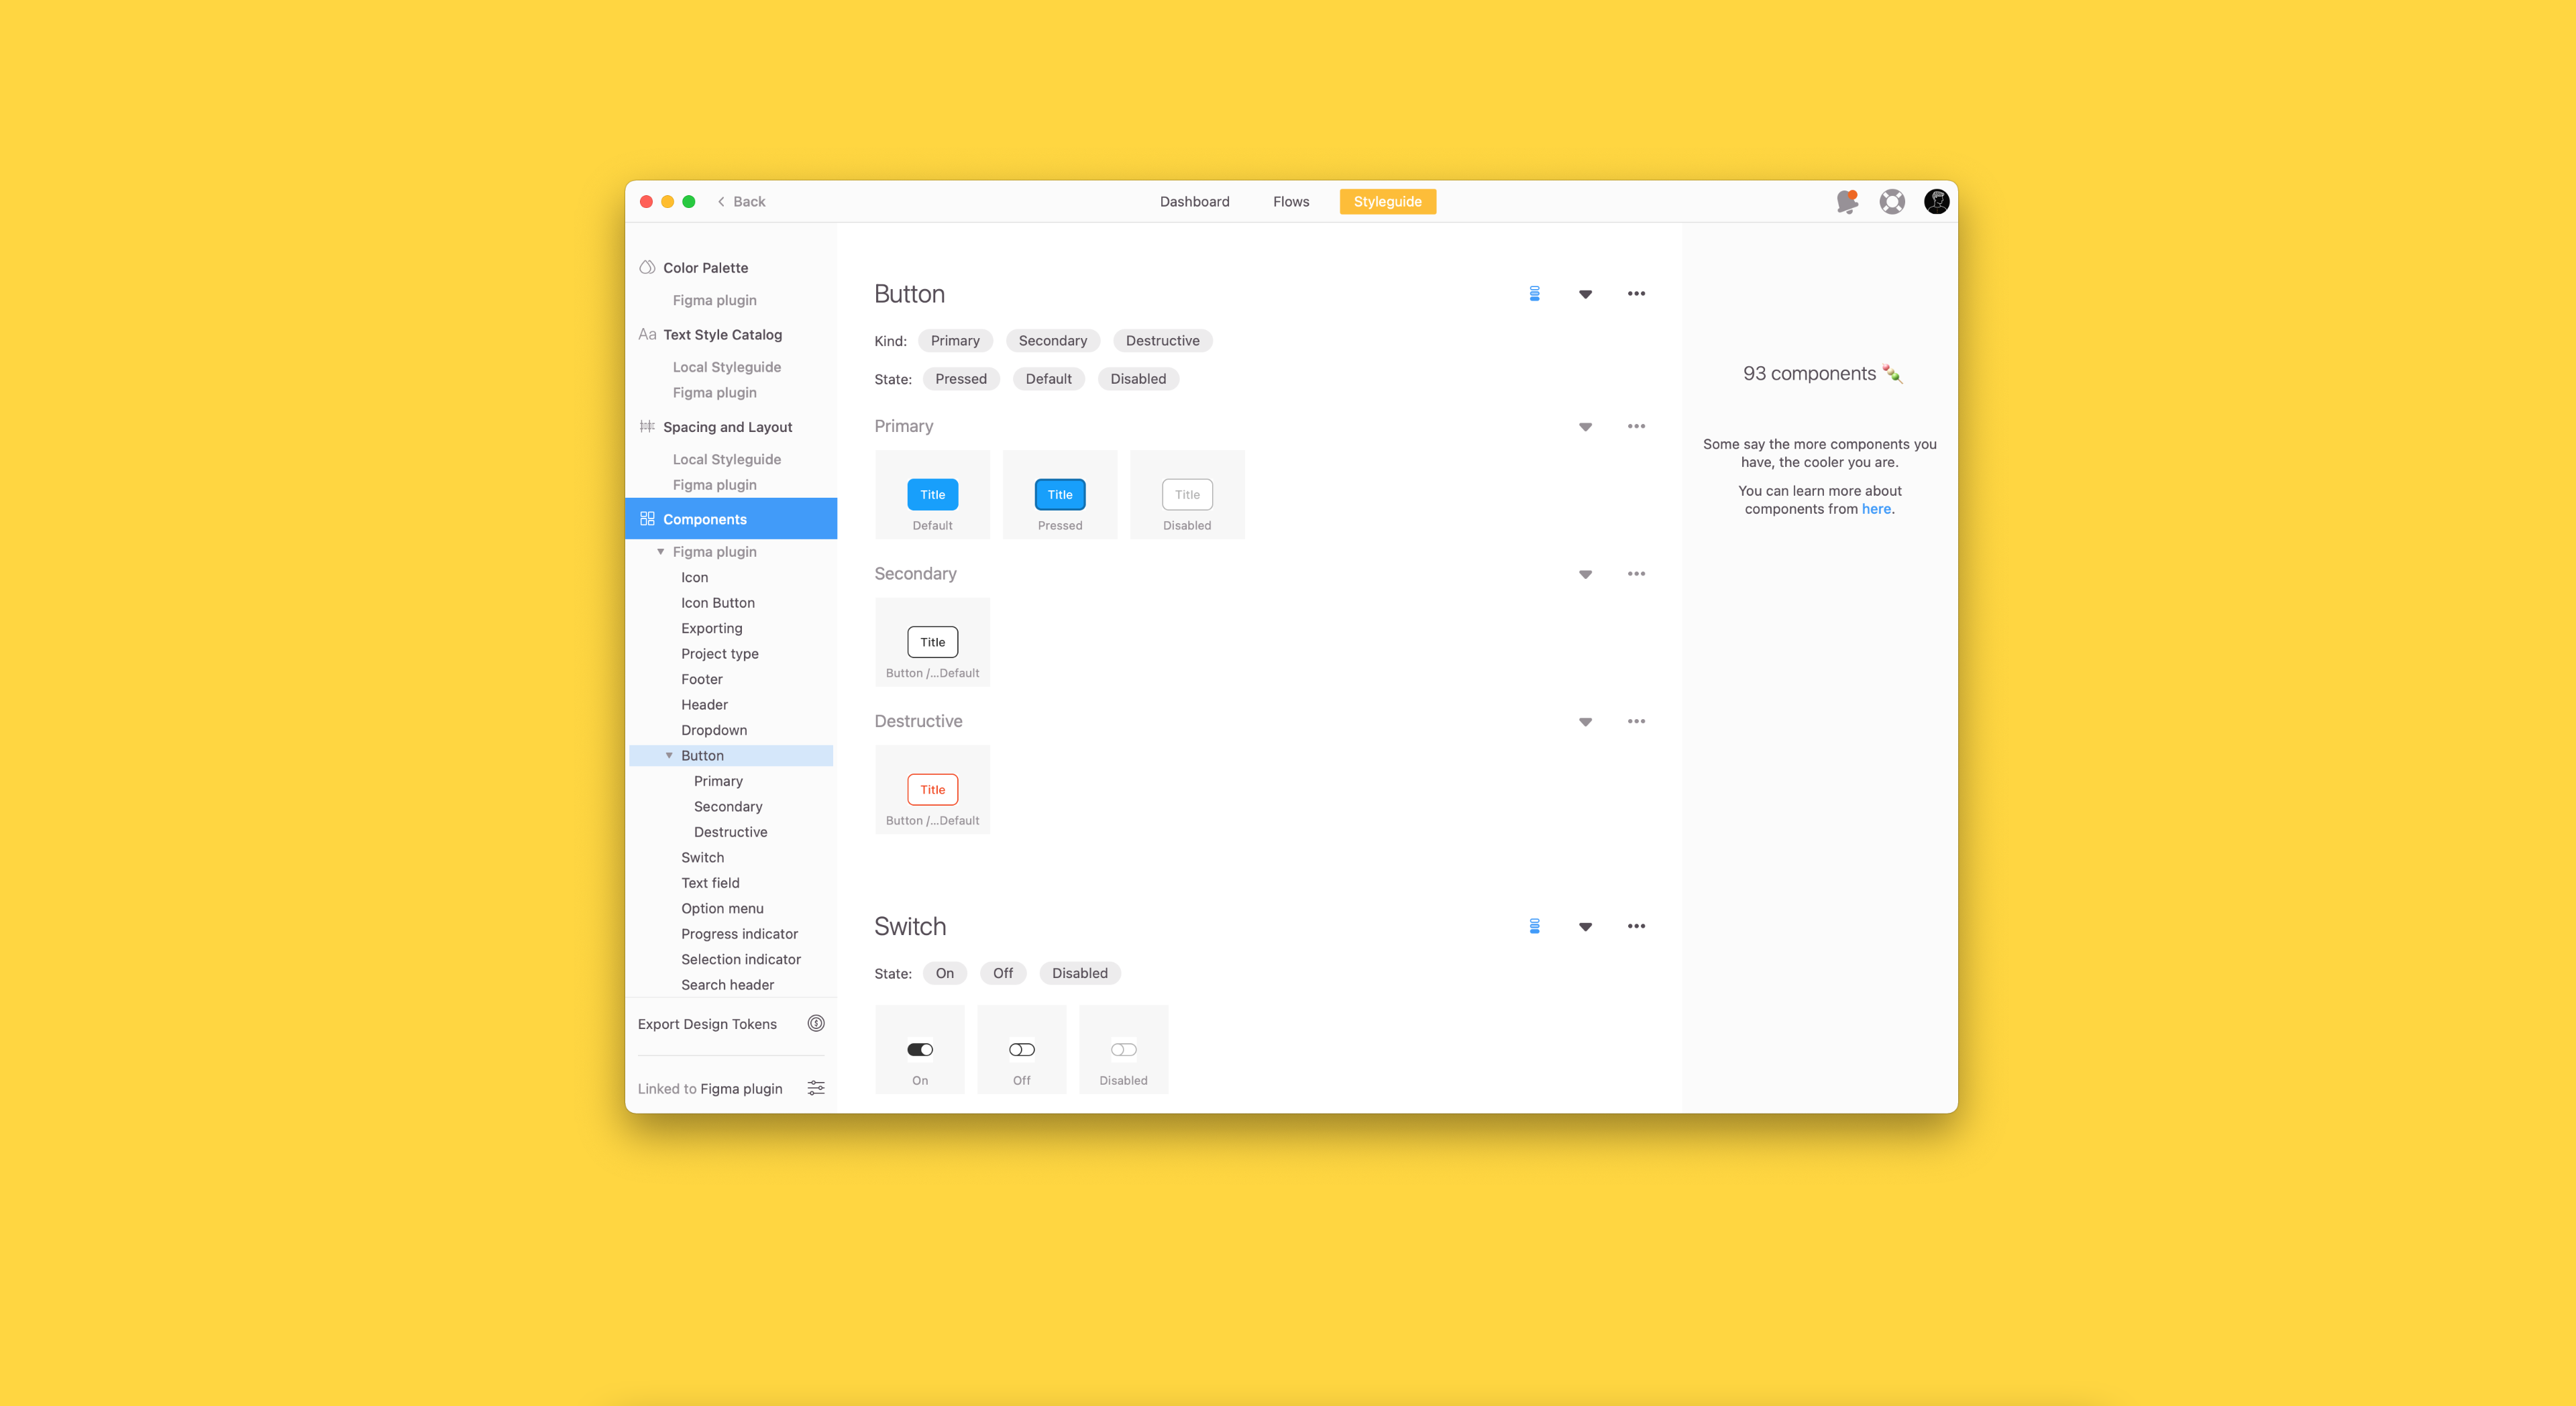 How to improve your design workflow with Zeplin and Sketch  by Galaxy  Weblinks  Design  Sketch  Medium